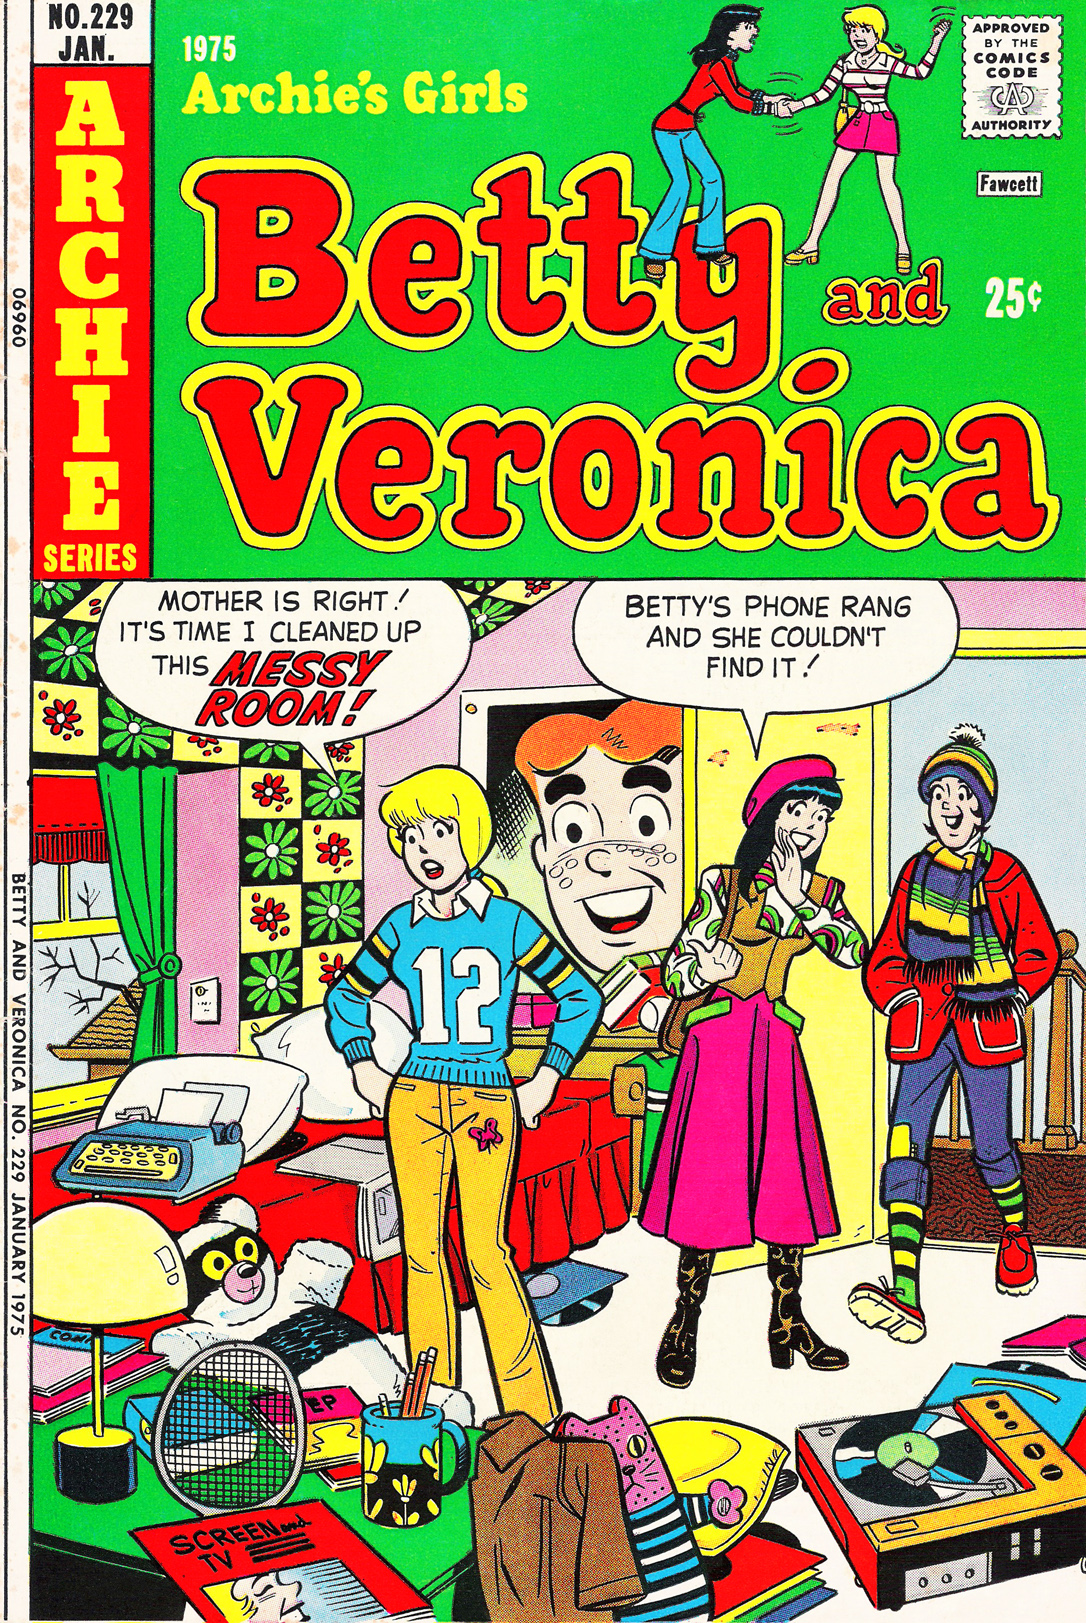 Read online Archie's Girls Betty and Veronica comic -  Issue #229 - 1